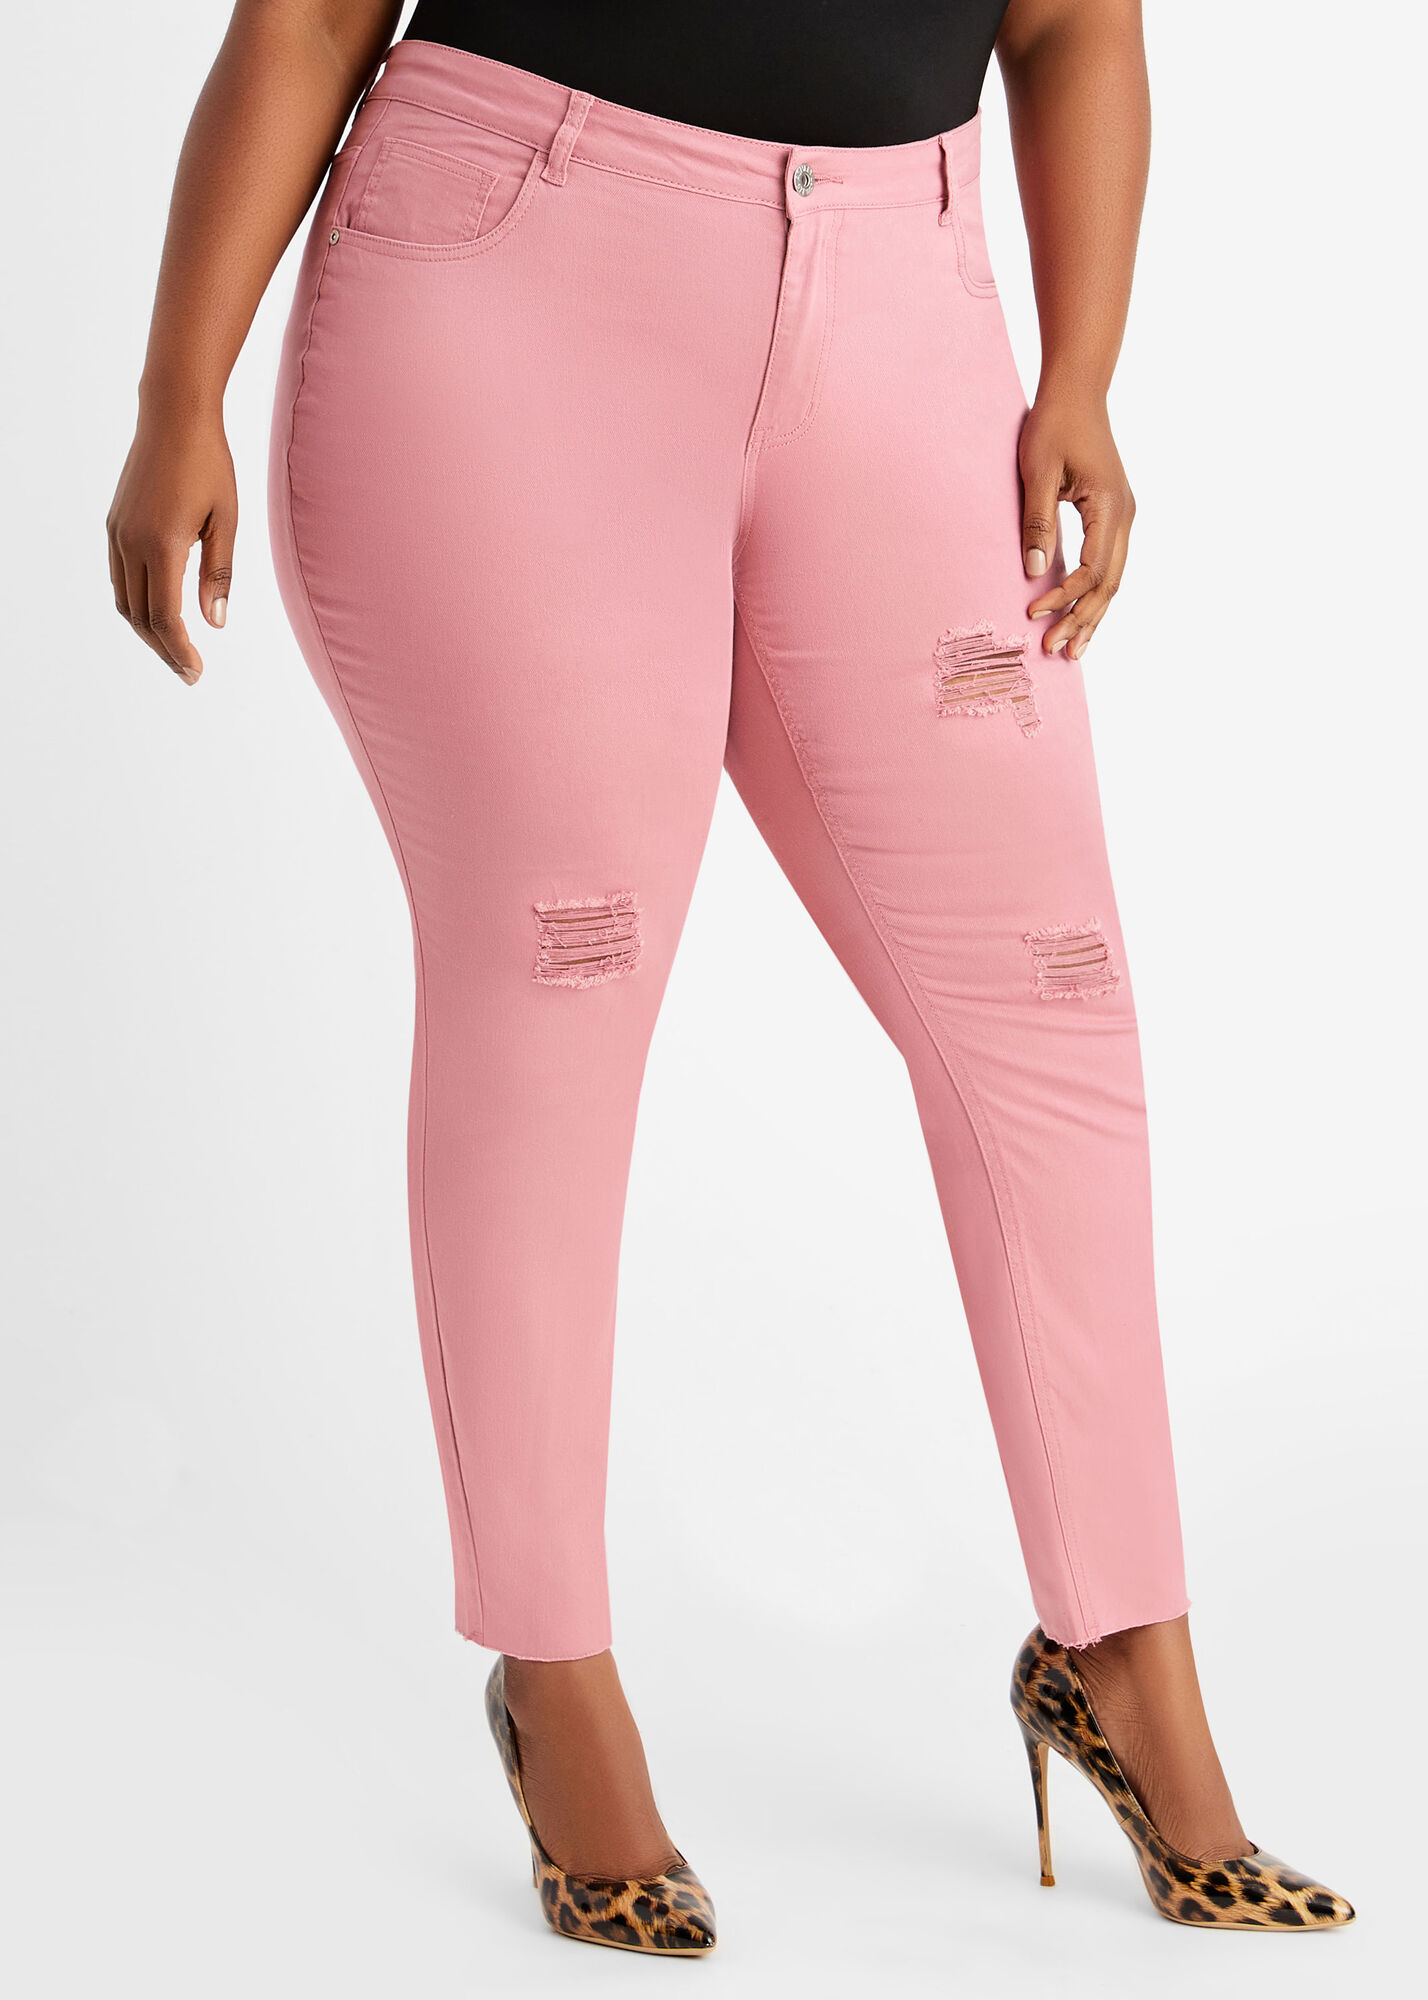 Plus Size Pink Distressed Waist Stretchy Jeans Jeggings